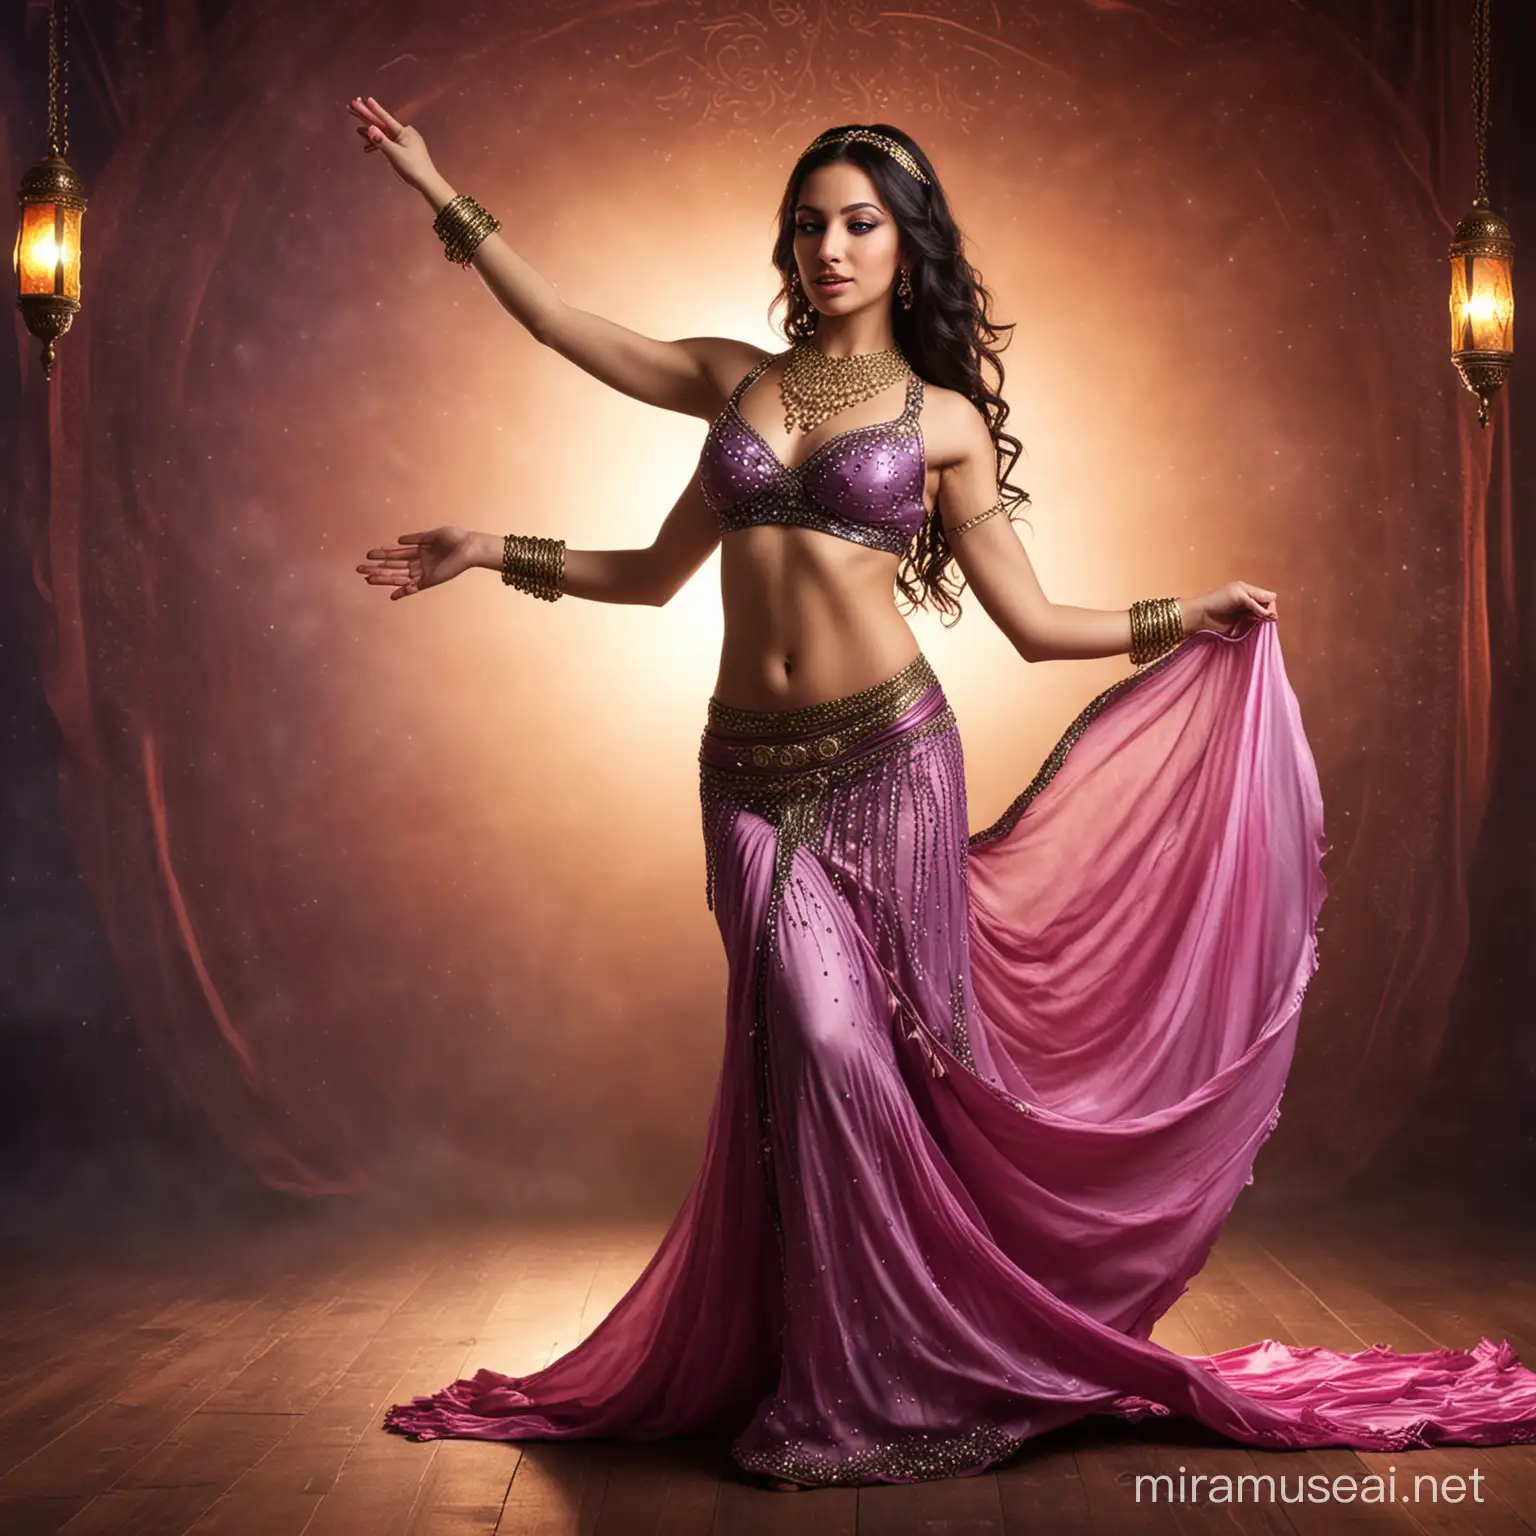 Enchanting Belly Dance Performance in a 1001 Nights Setting